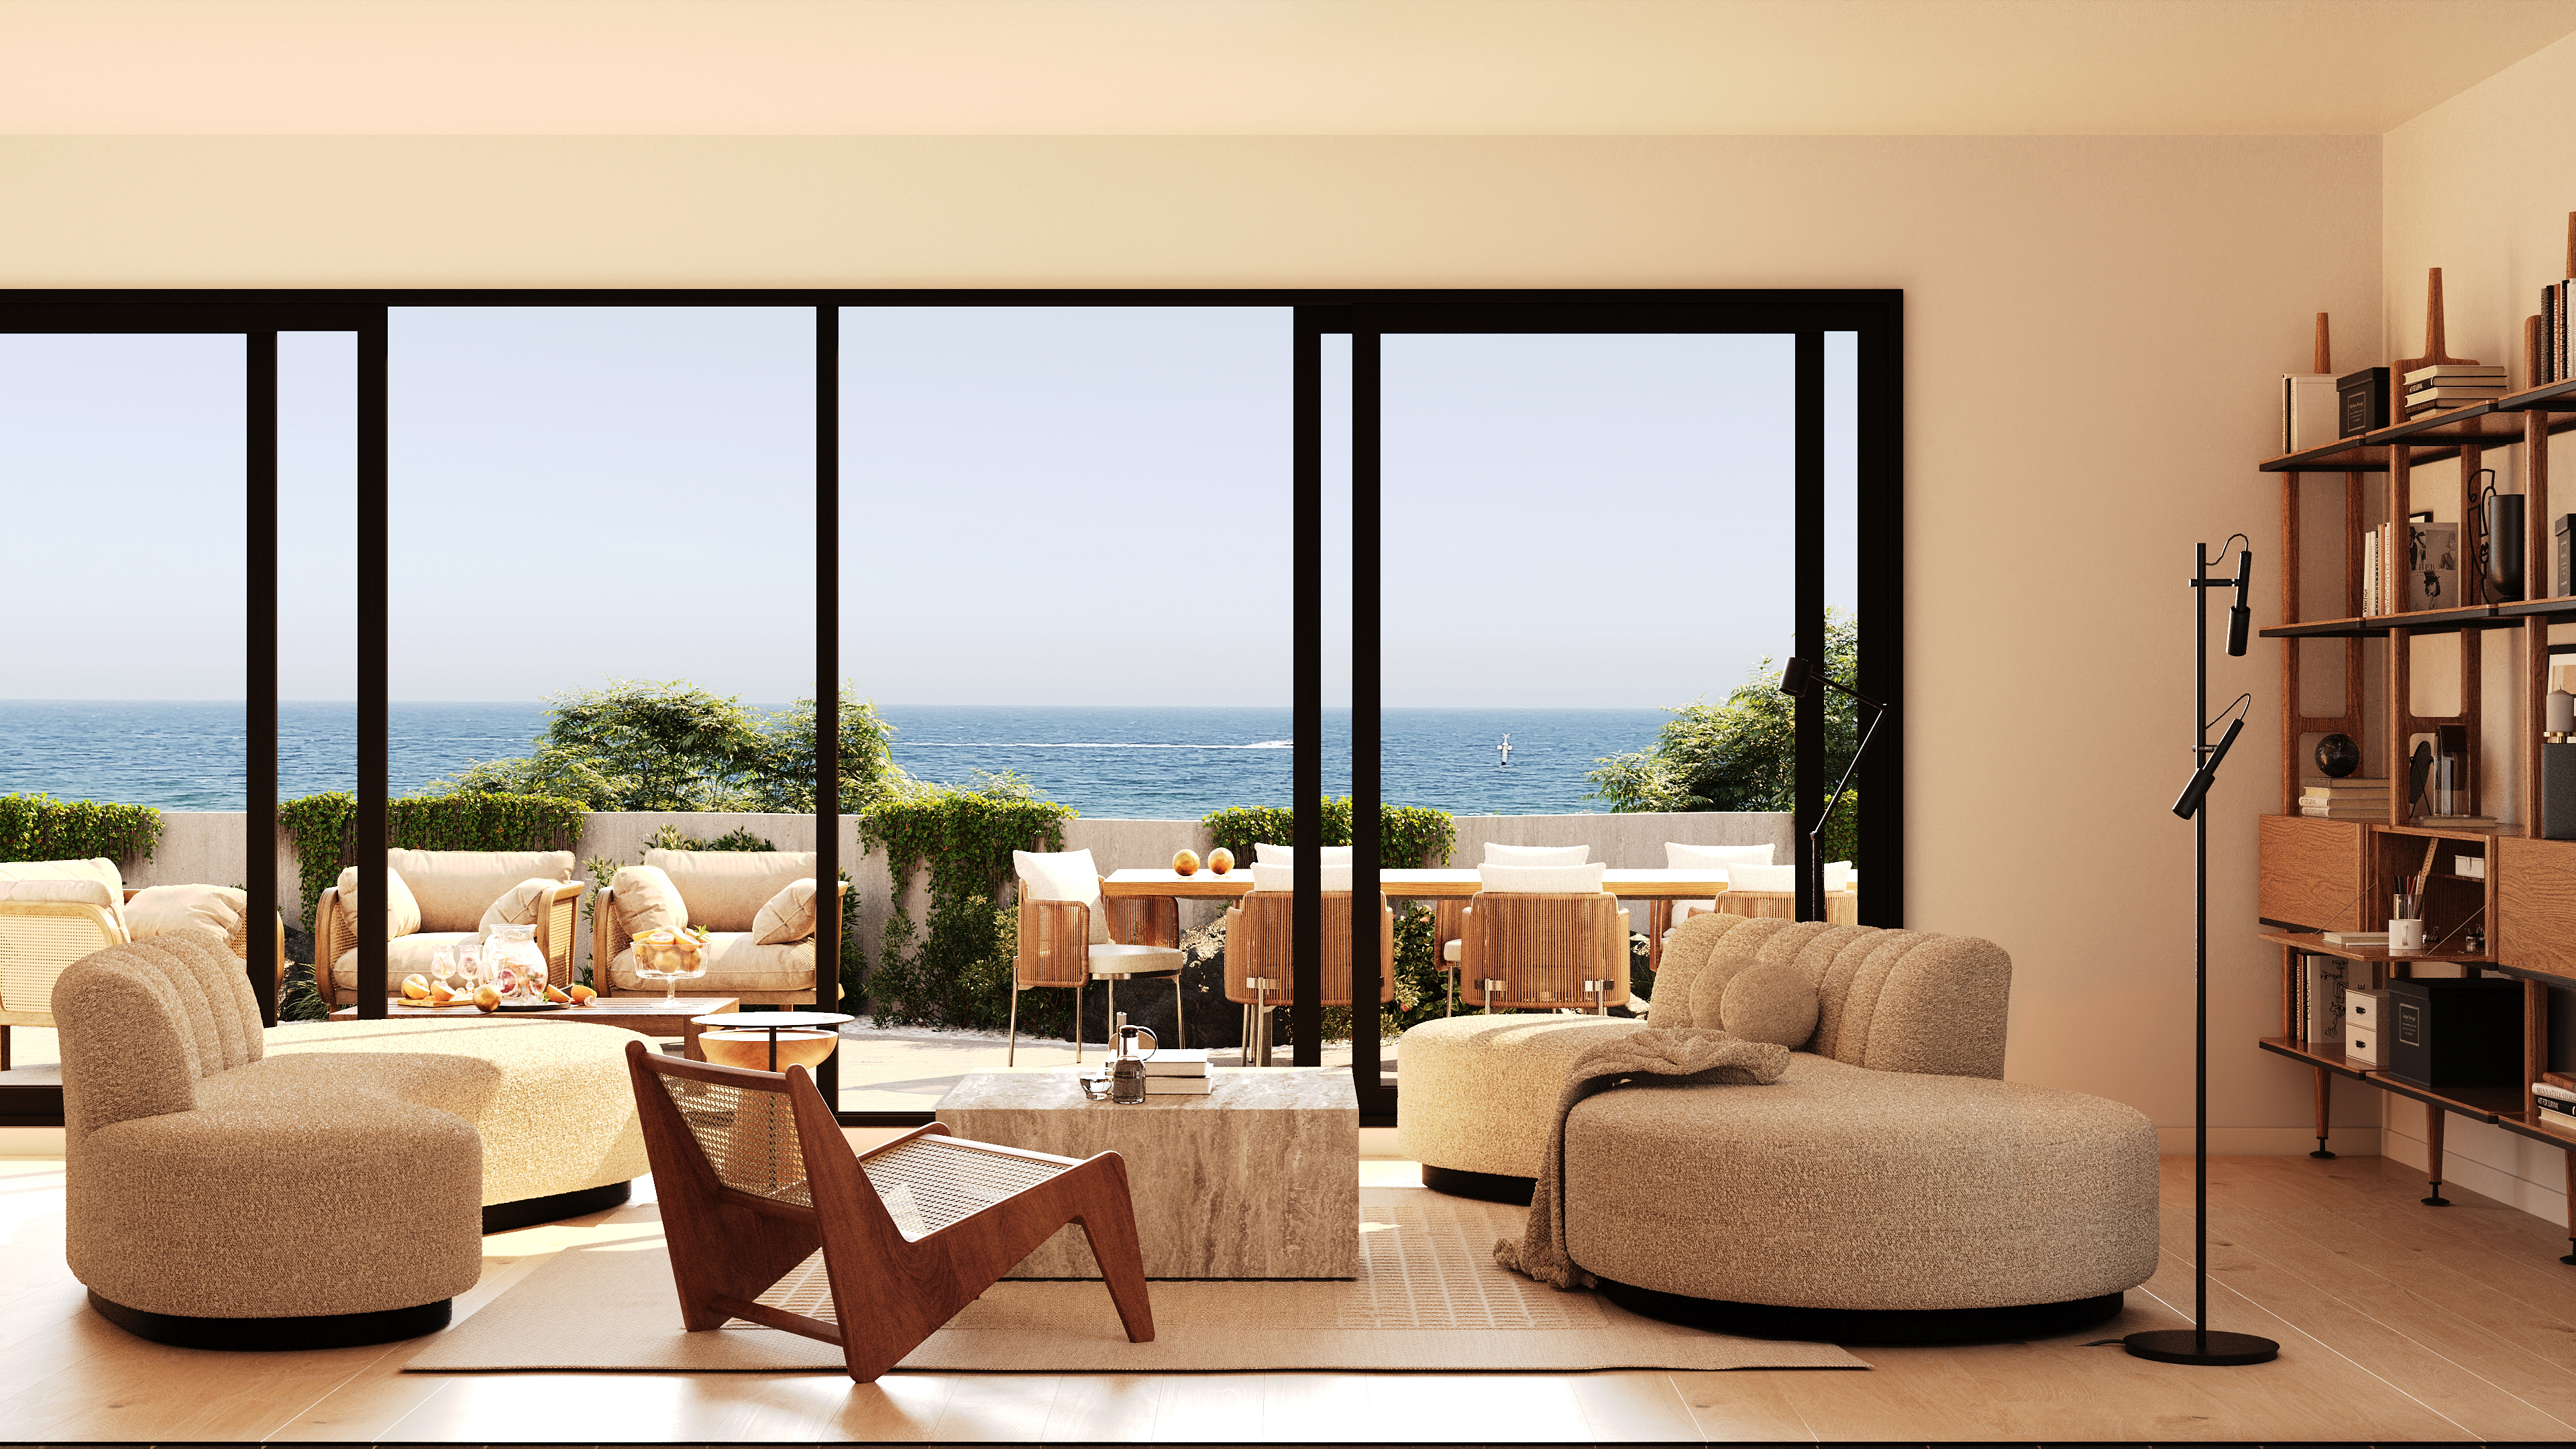 Render of Sandringham apartment living area with water views from the balcony